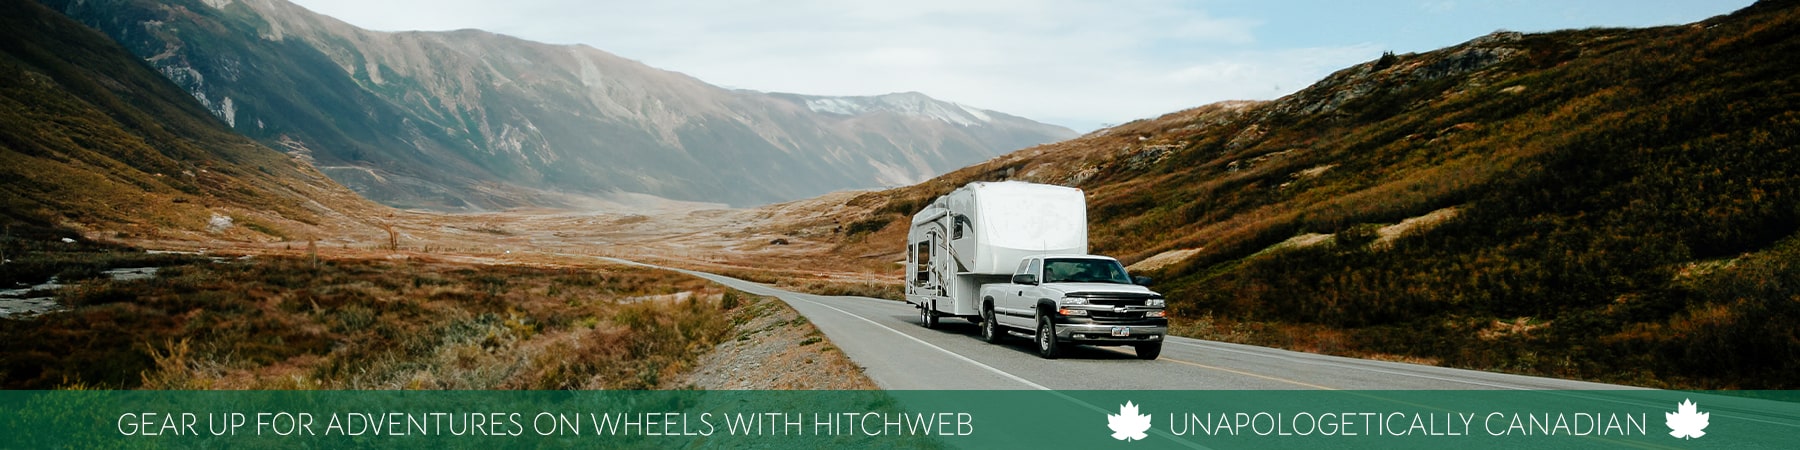 GEAR UP FOR ADVENTURE WITH HITCHWEB CANADA